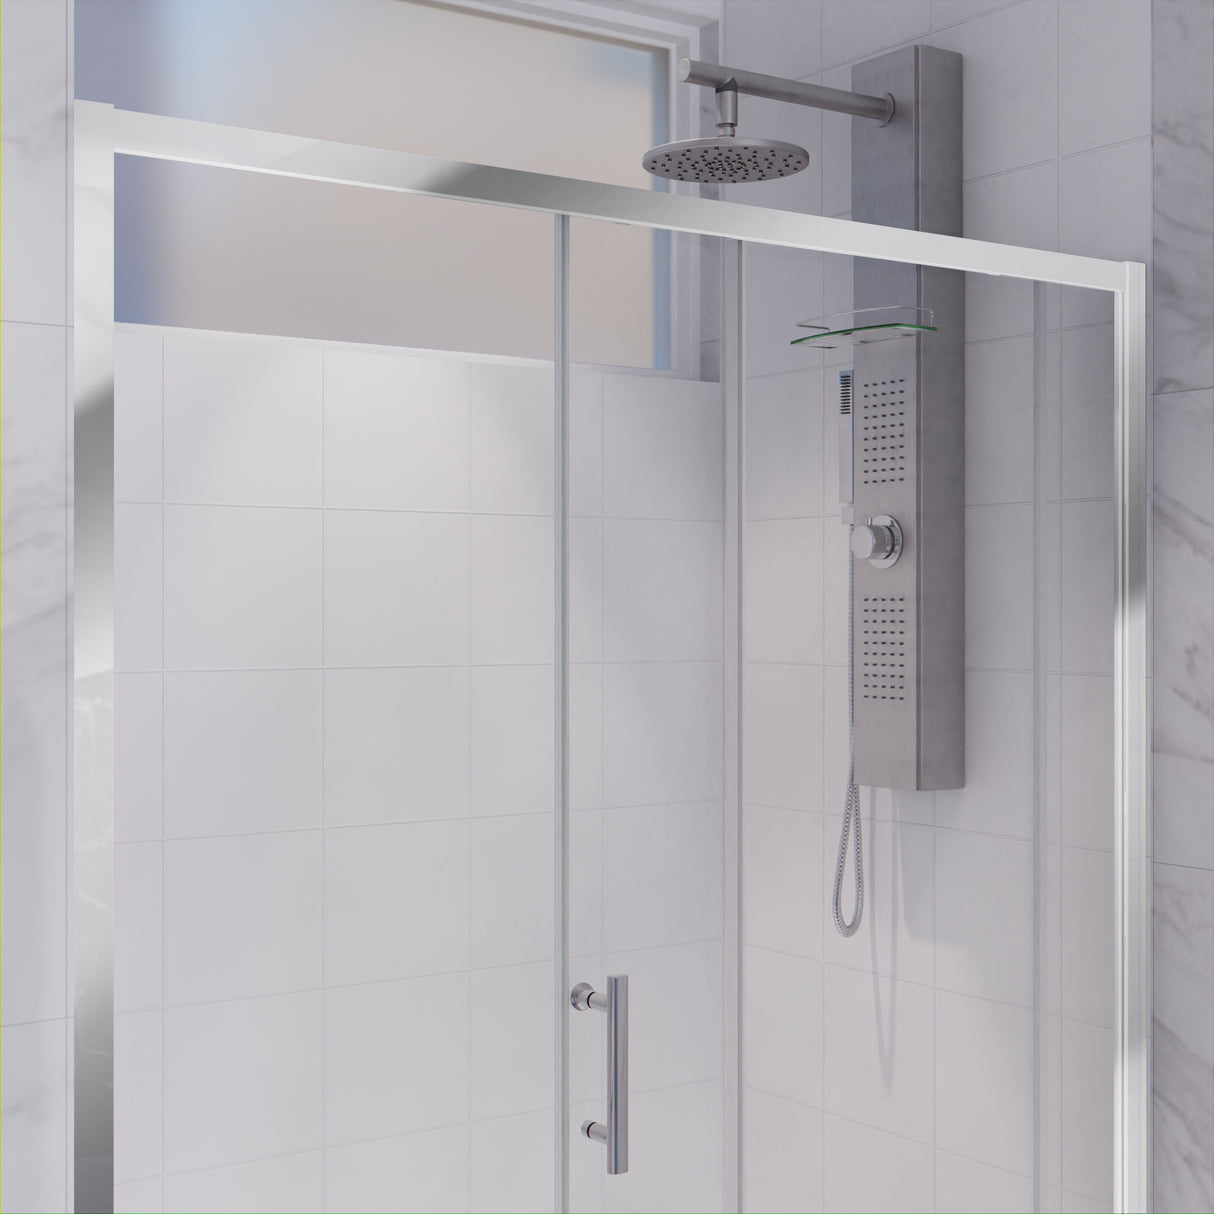 ANZZI SD-AZ052-01CH Halberd 48 in. x 72 in. Framed Shower Door with TSUNAMI GUARD in Polished Chrome